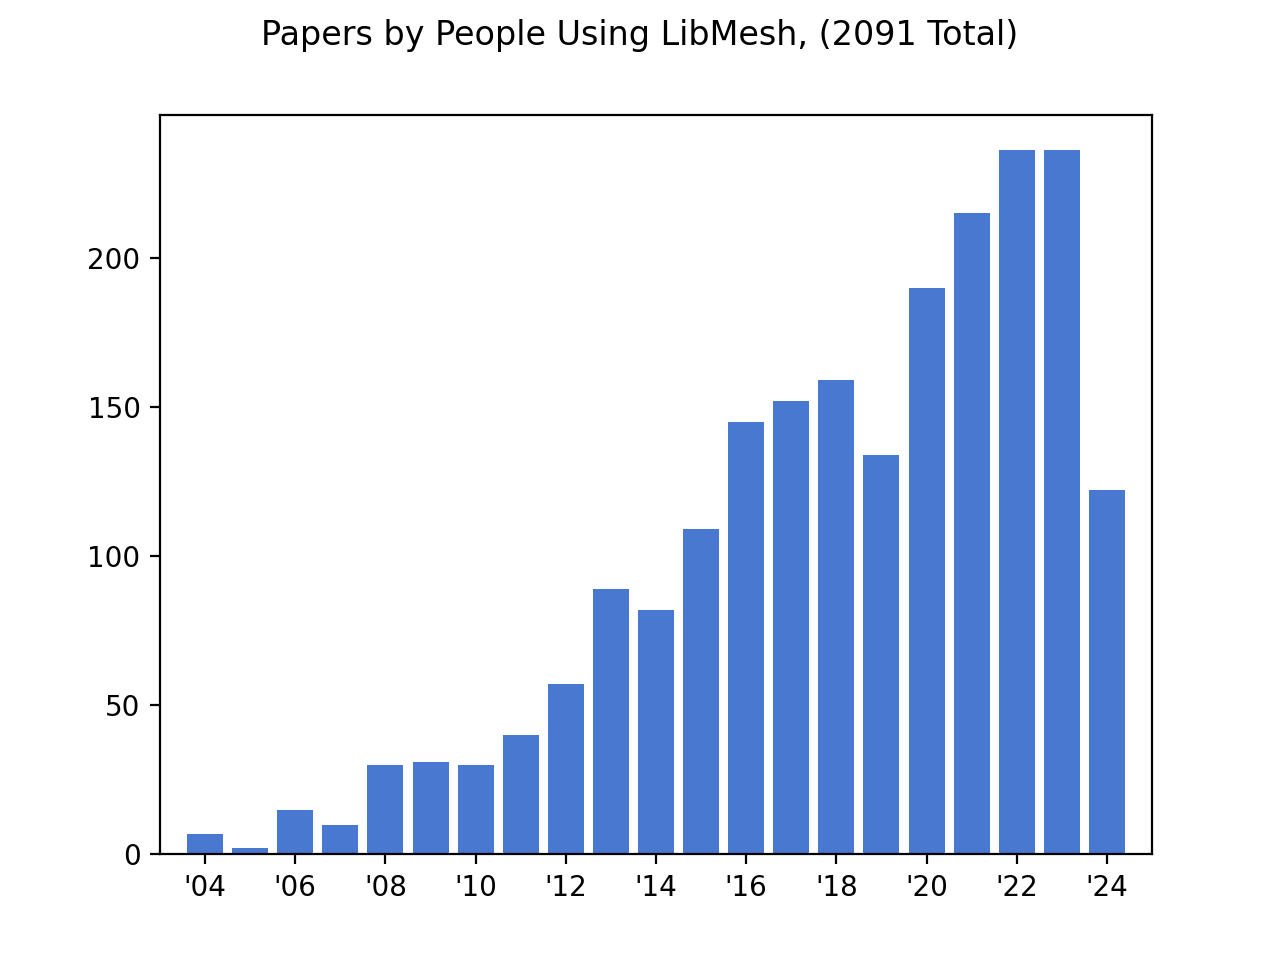 Number of papers by people using libMesh each year